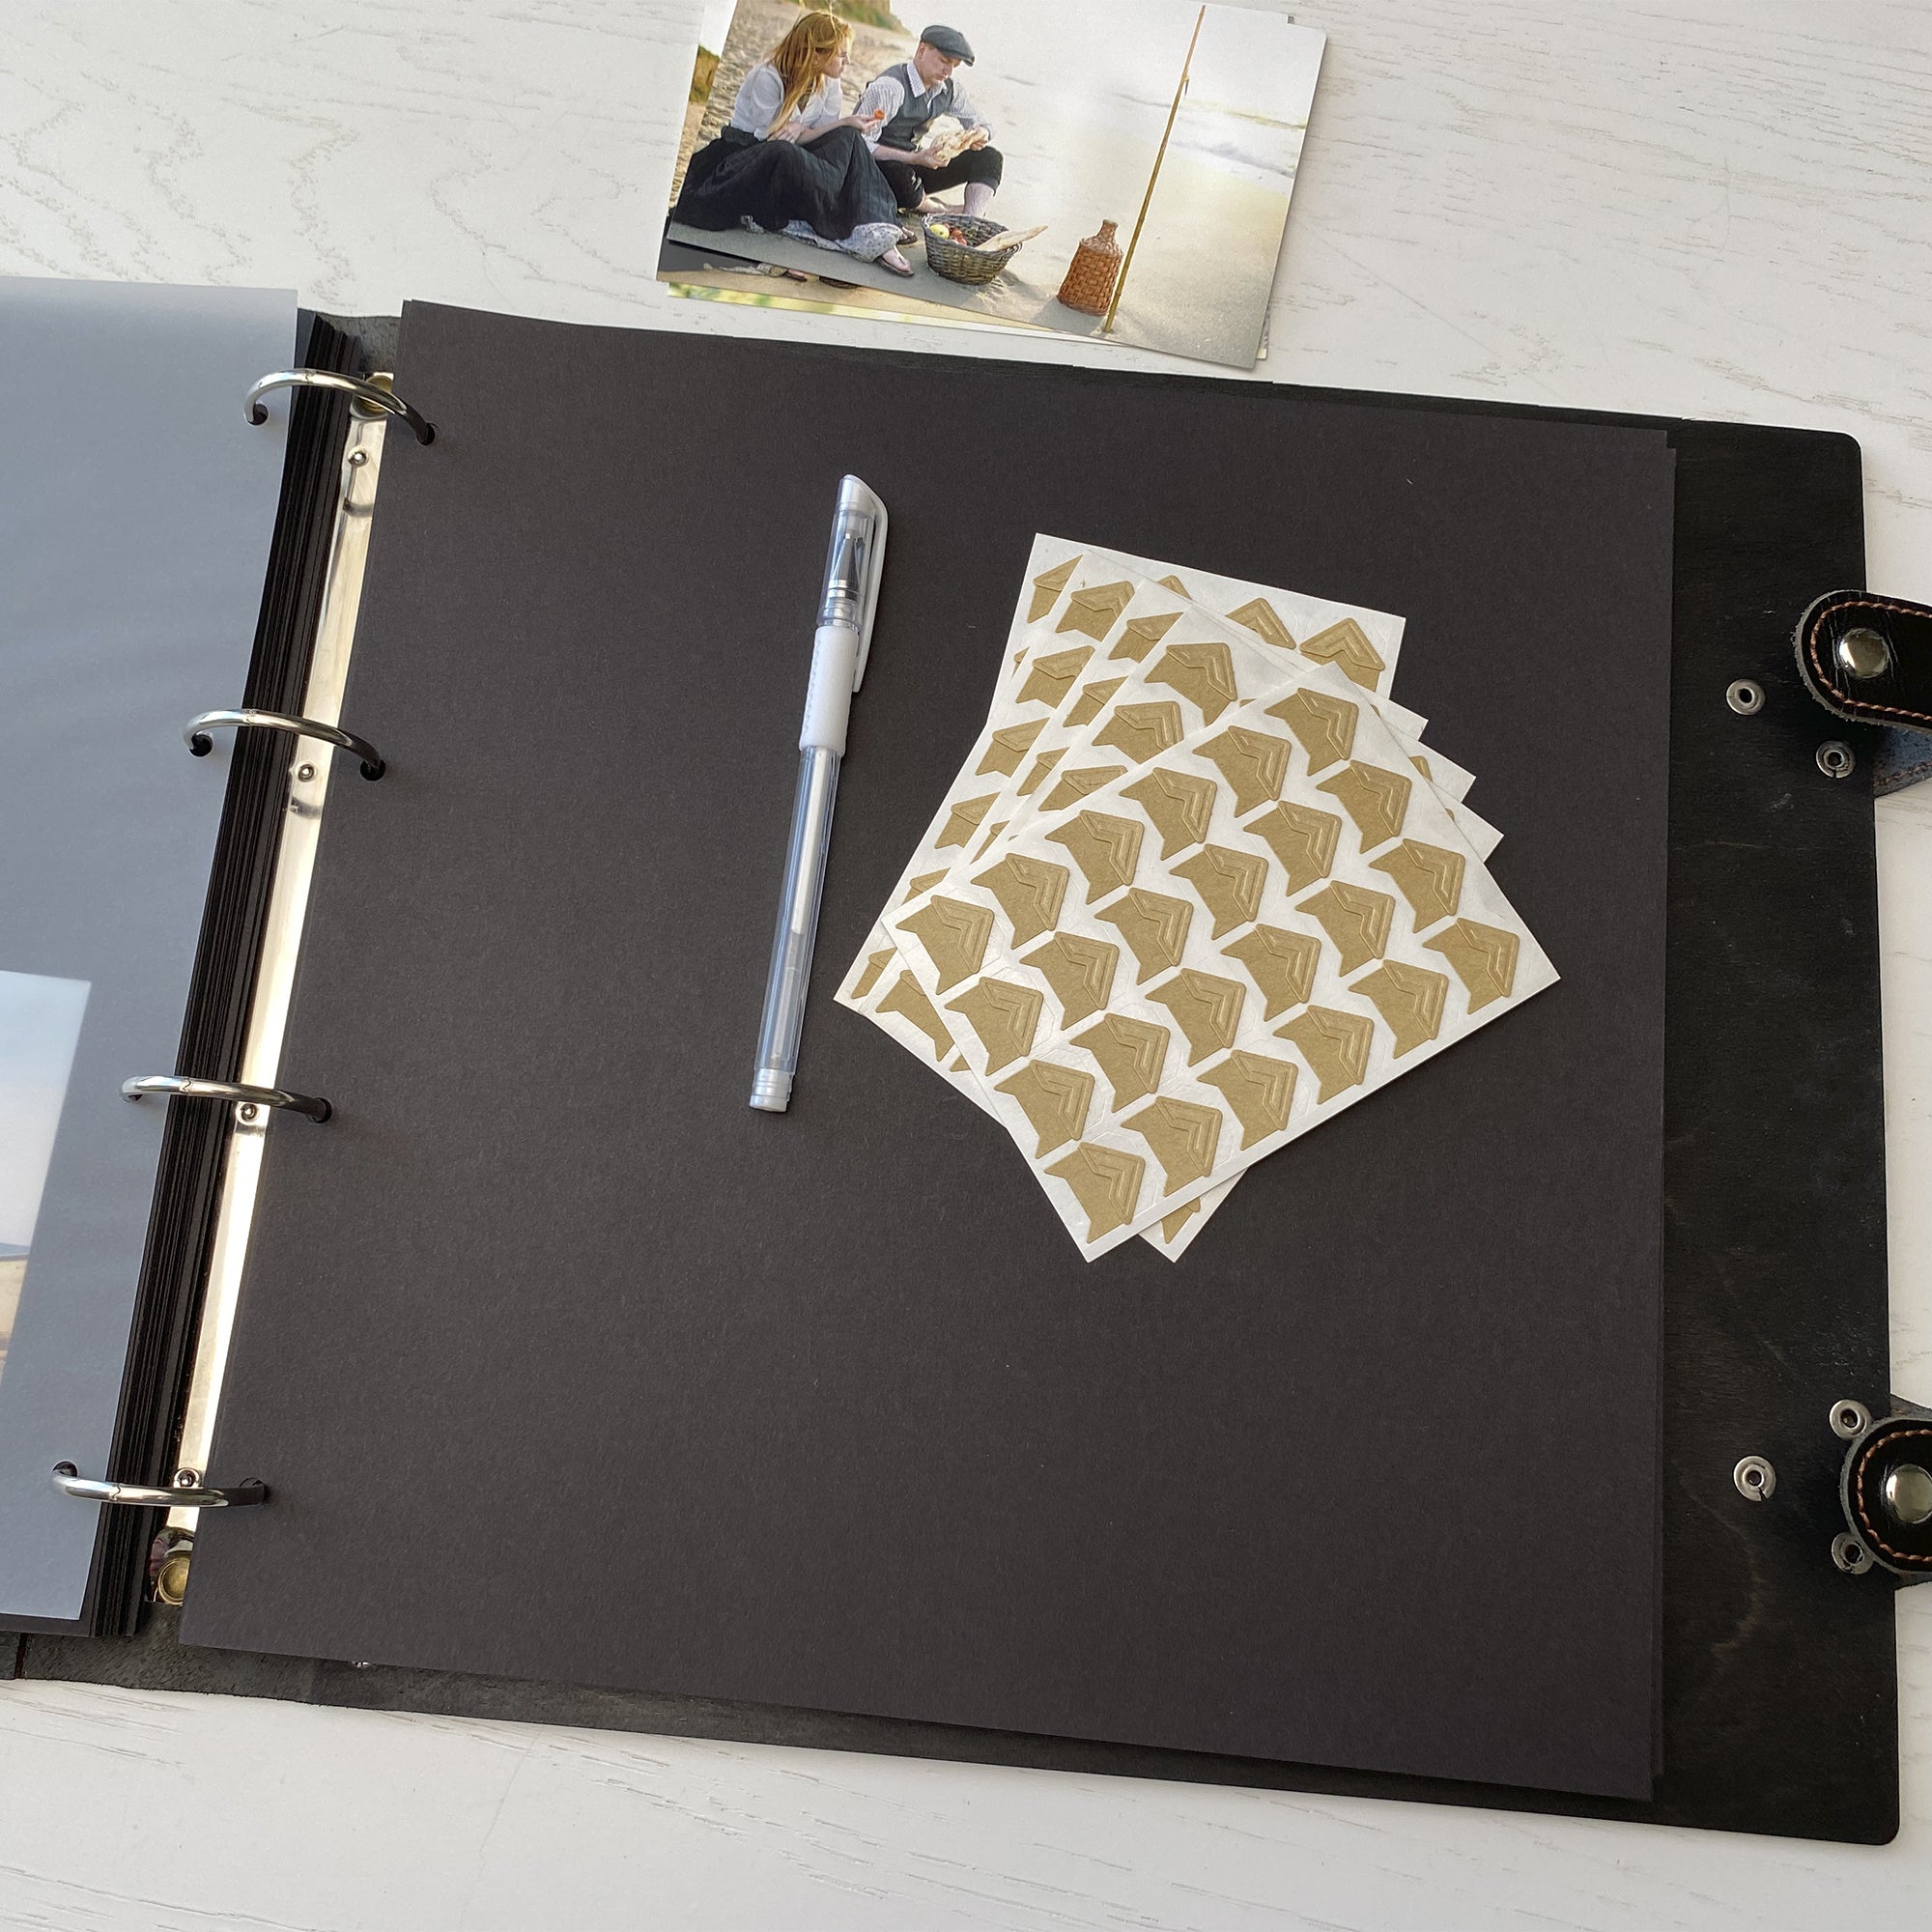 Personalized photo album with leather cover and Wood Life engraving